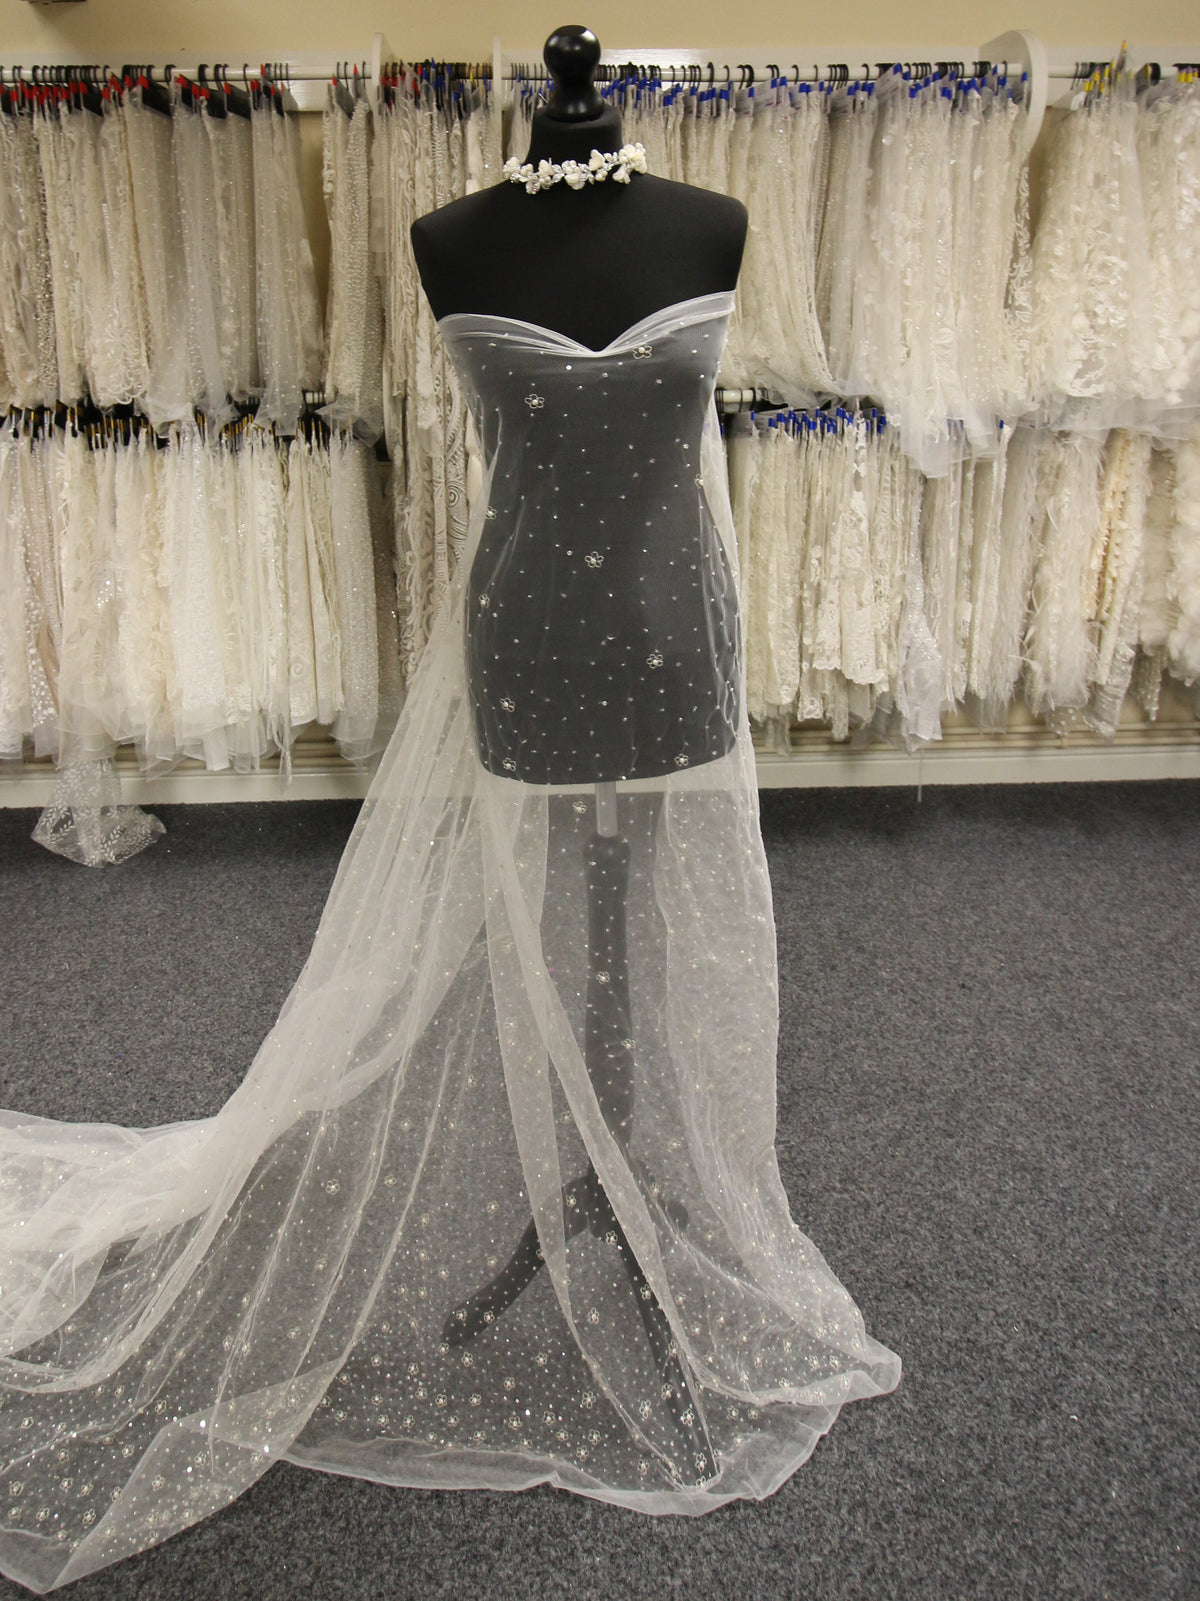 The Magnificent Pearl Tulle Lace - Buifabrics